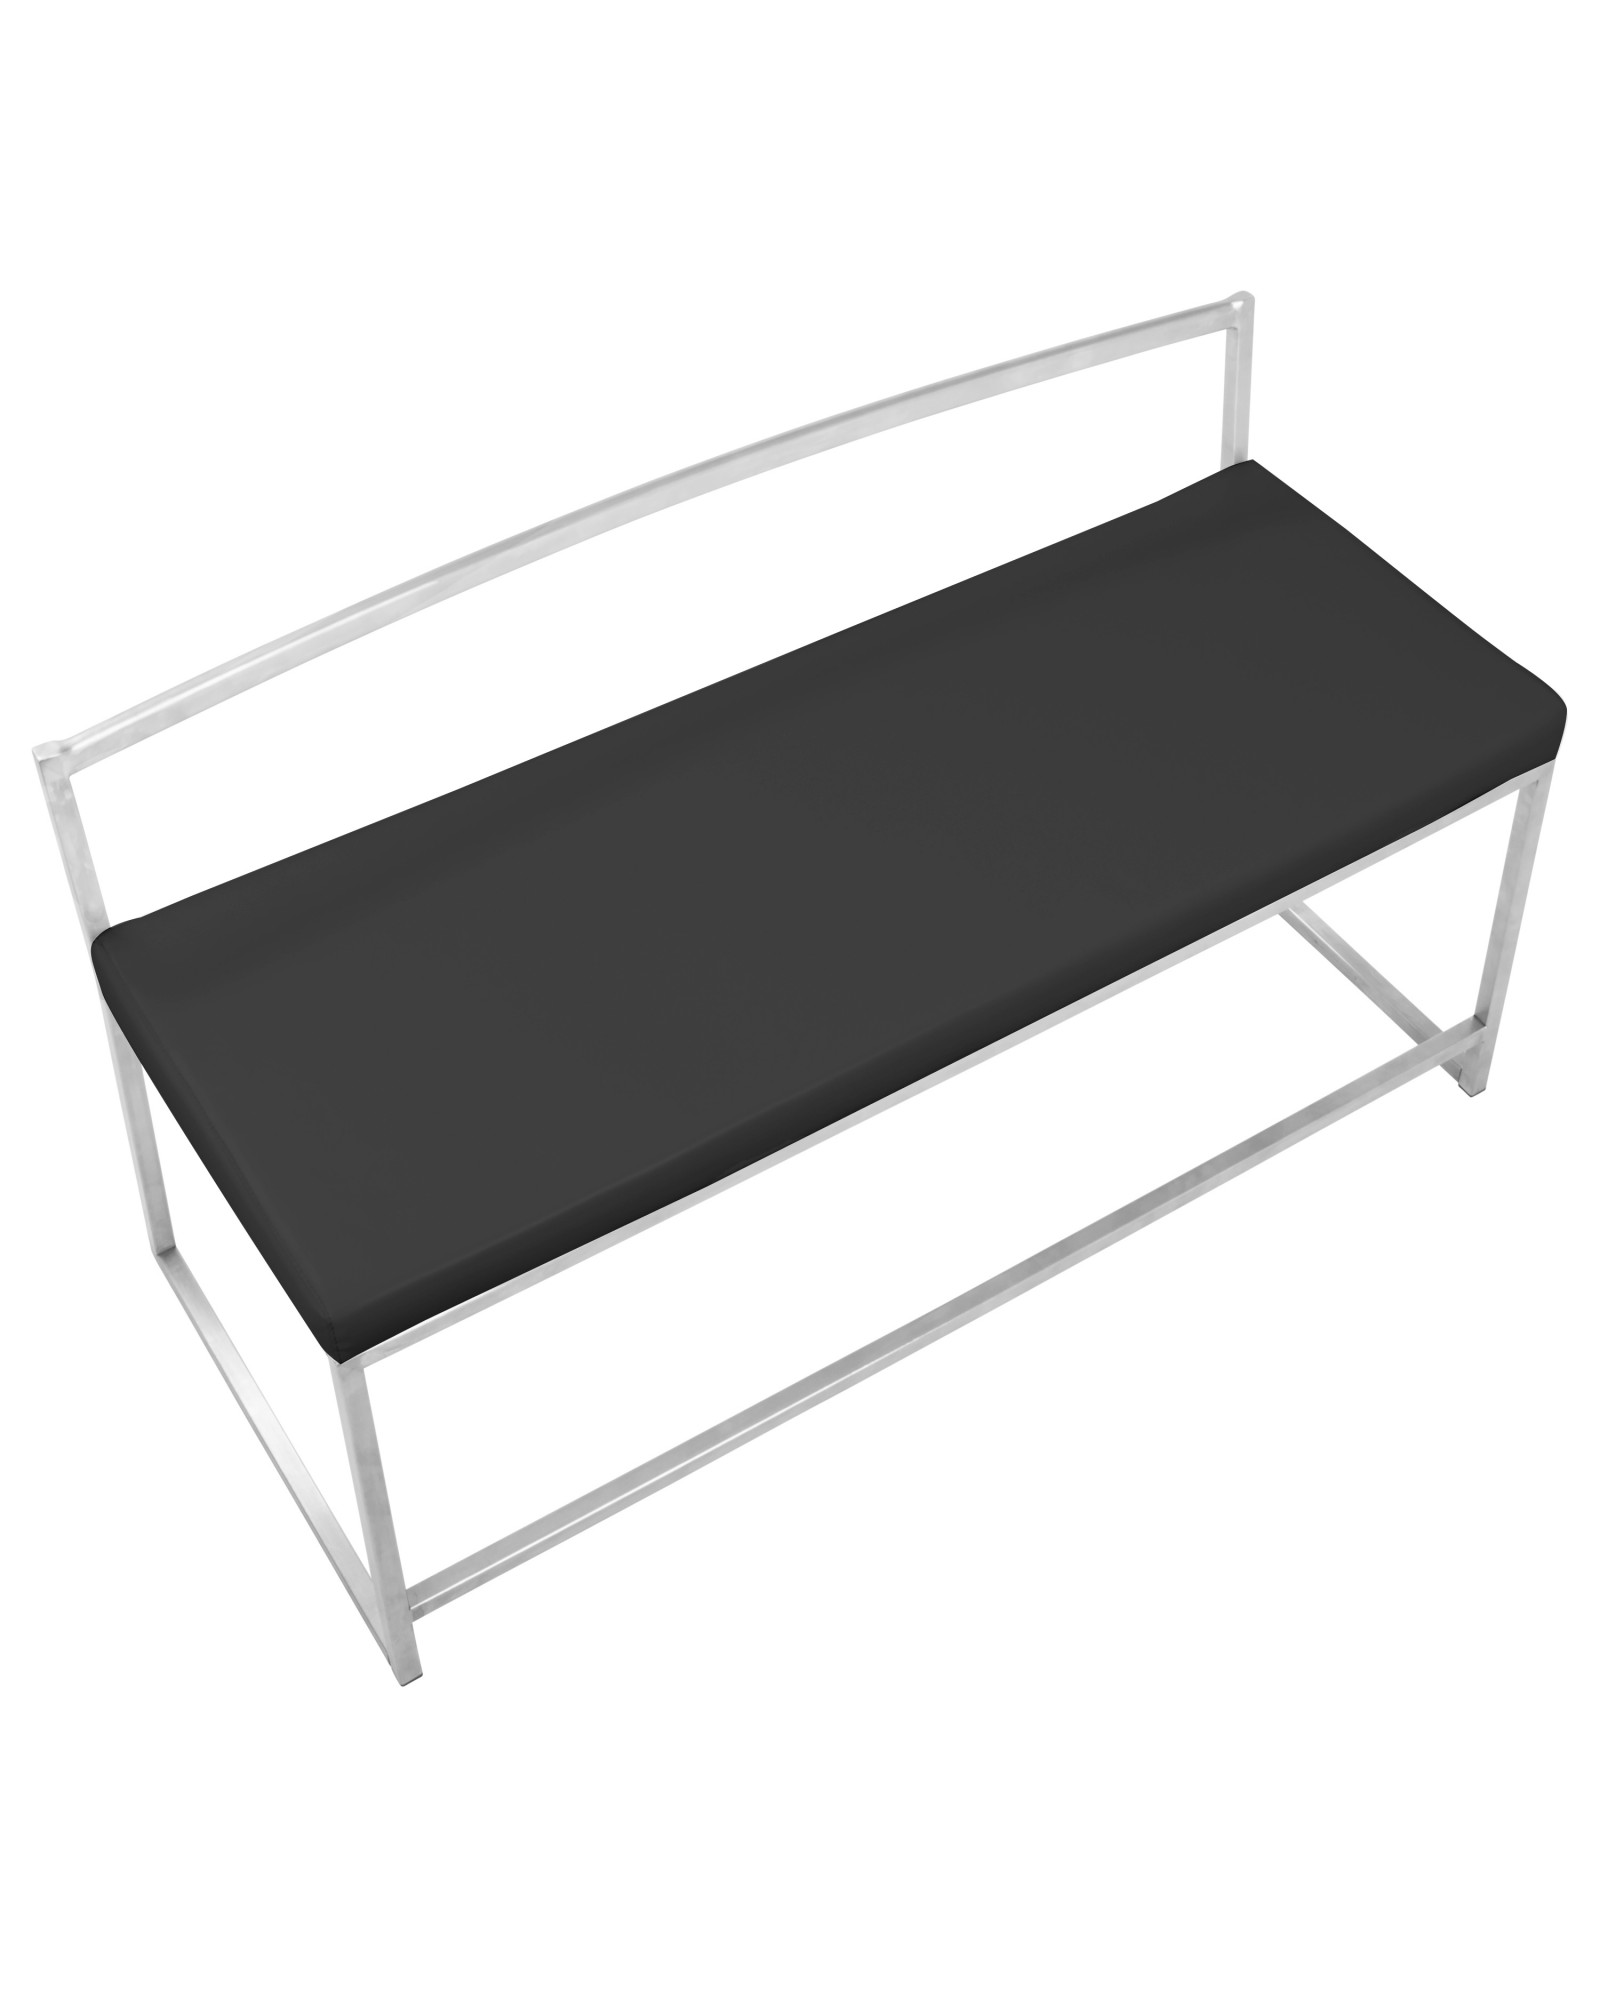 Fuji Contemporary Dining / Entryway Bench in Black Faux Leather